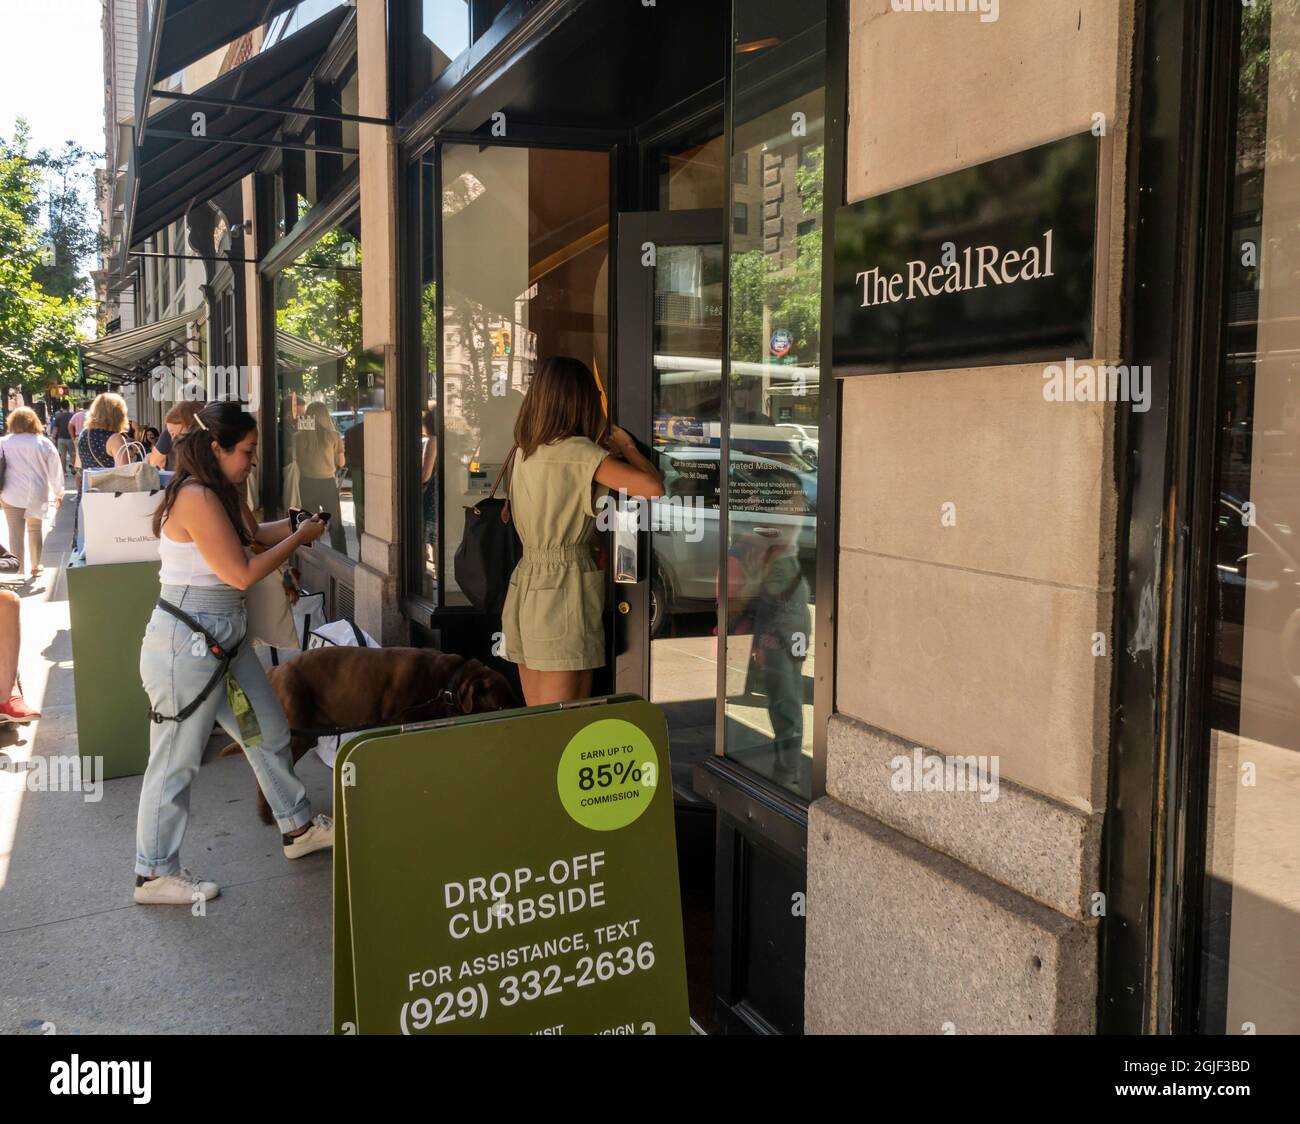 The RealReal opens Madison Avenue store